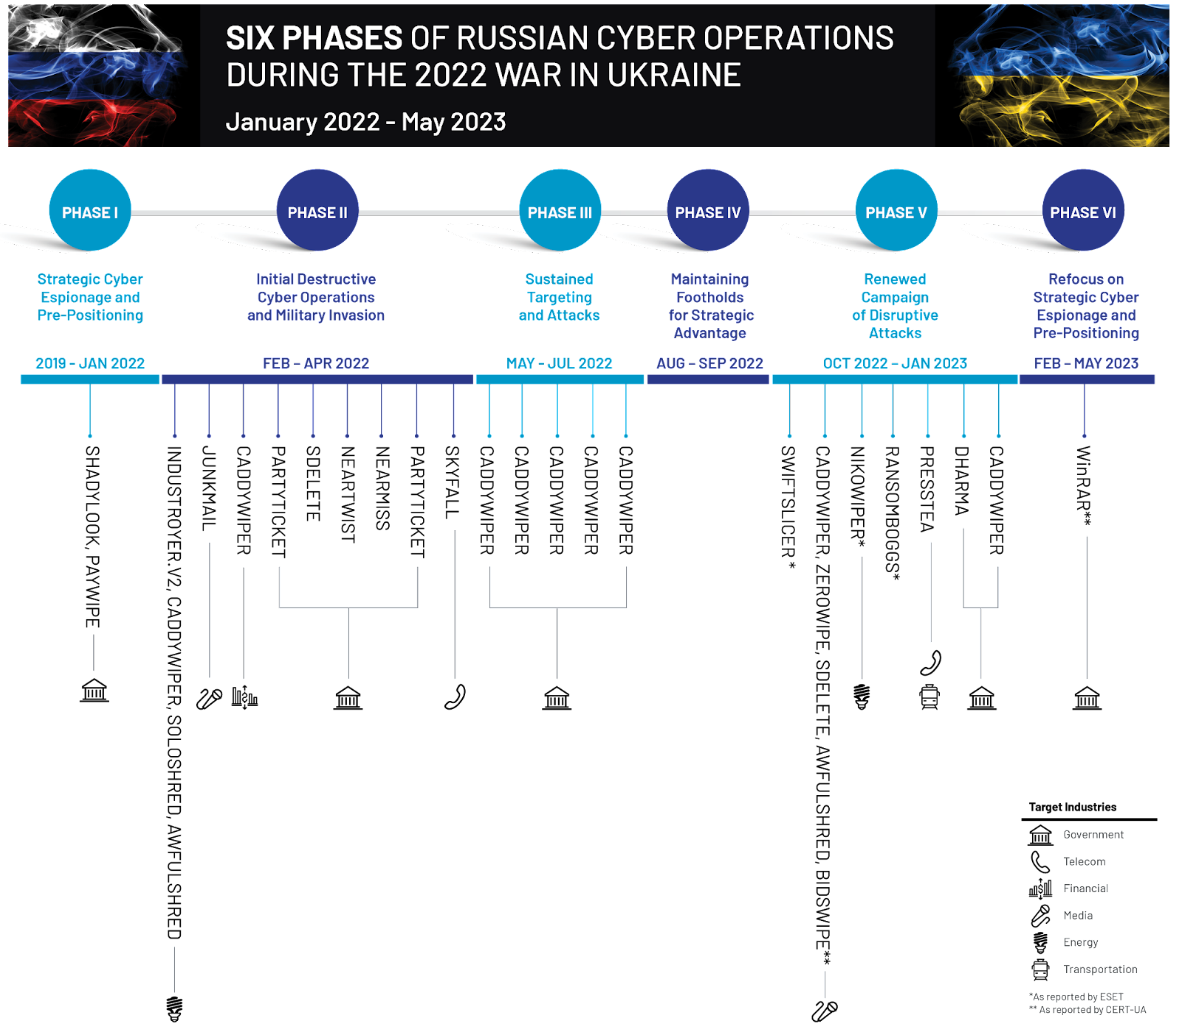 Phases of Russian Cyber Operations during the War in Ukraine